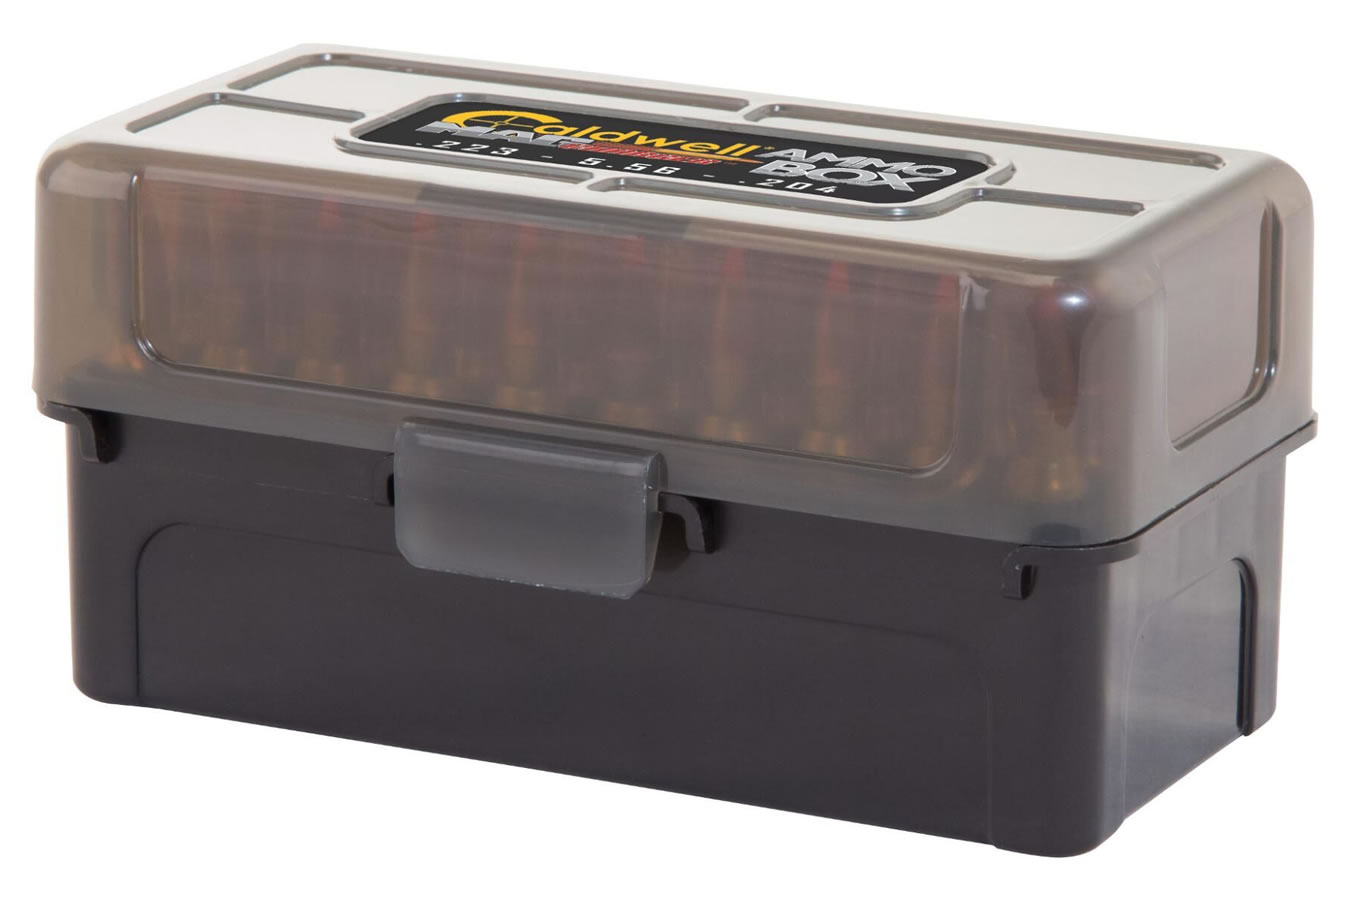 Caldwell Mag Charger Ammo Box 223/204 5 Pack